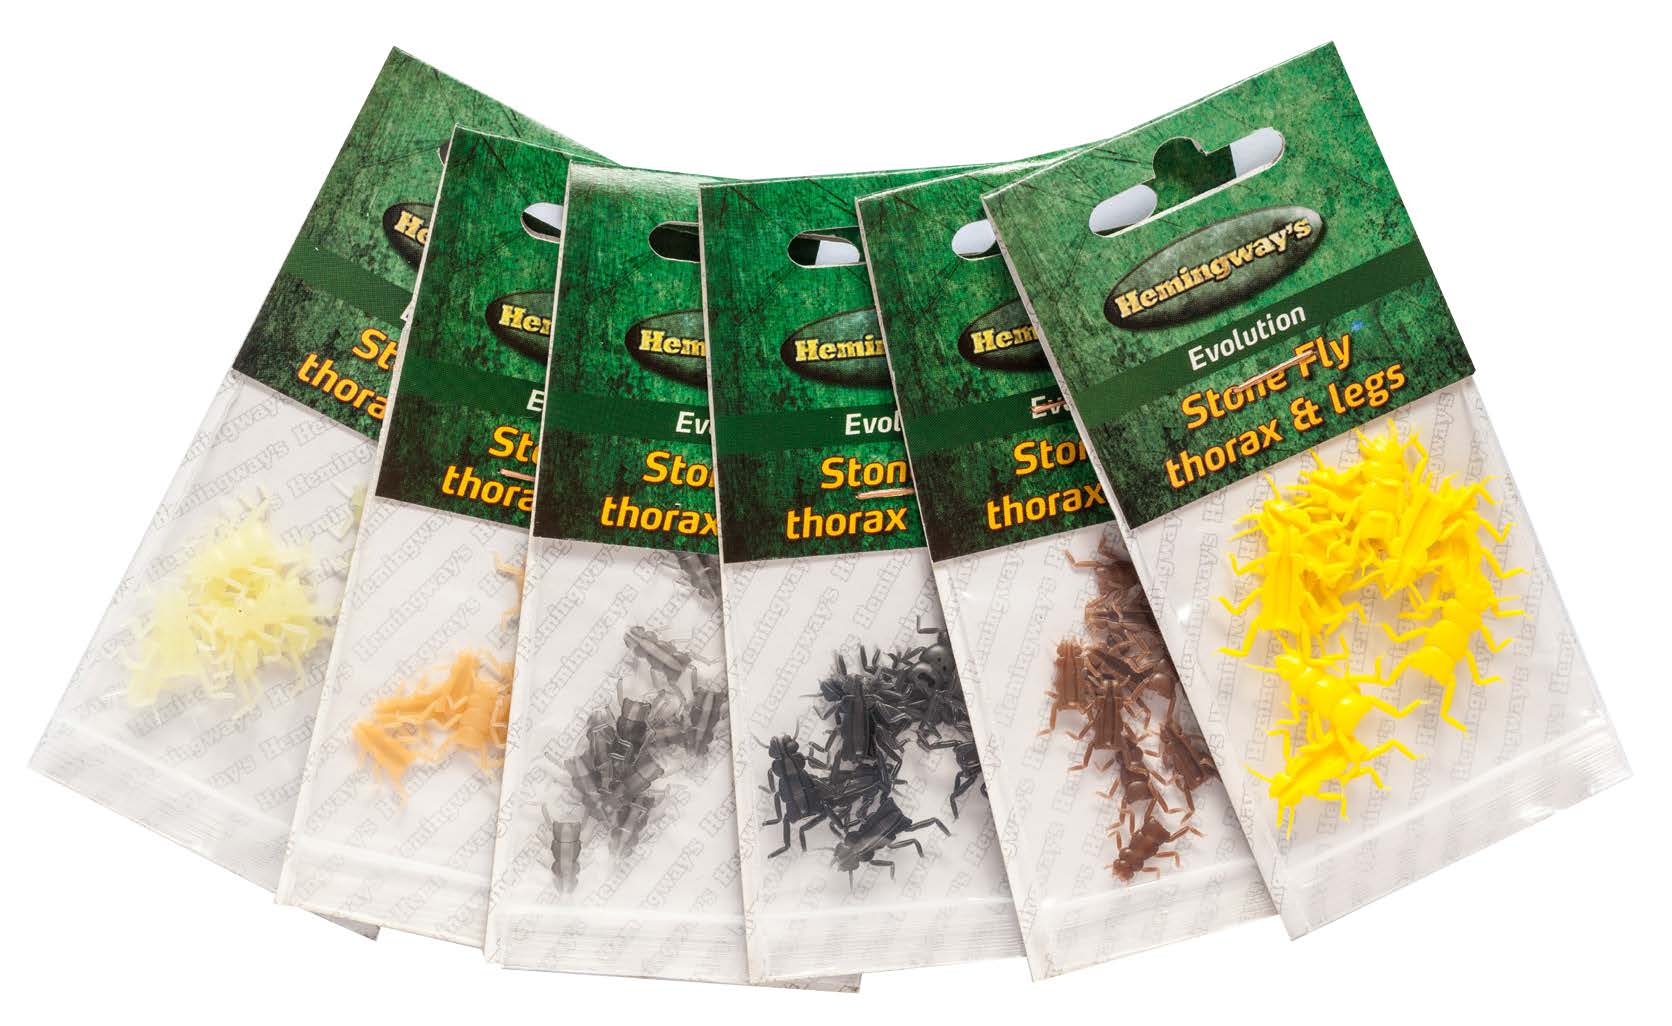 Hemingway's Hemingway Evolution Stone Fly Thorax & Legs Extra Large Clear Black Fly Tying Materials